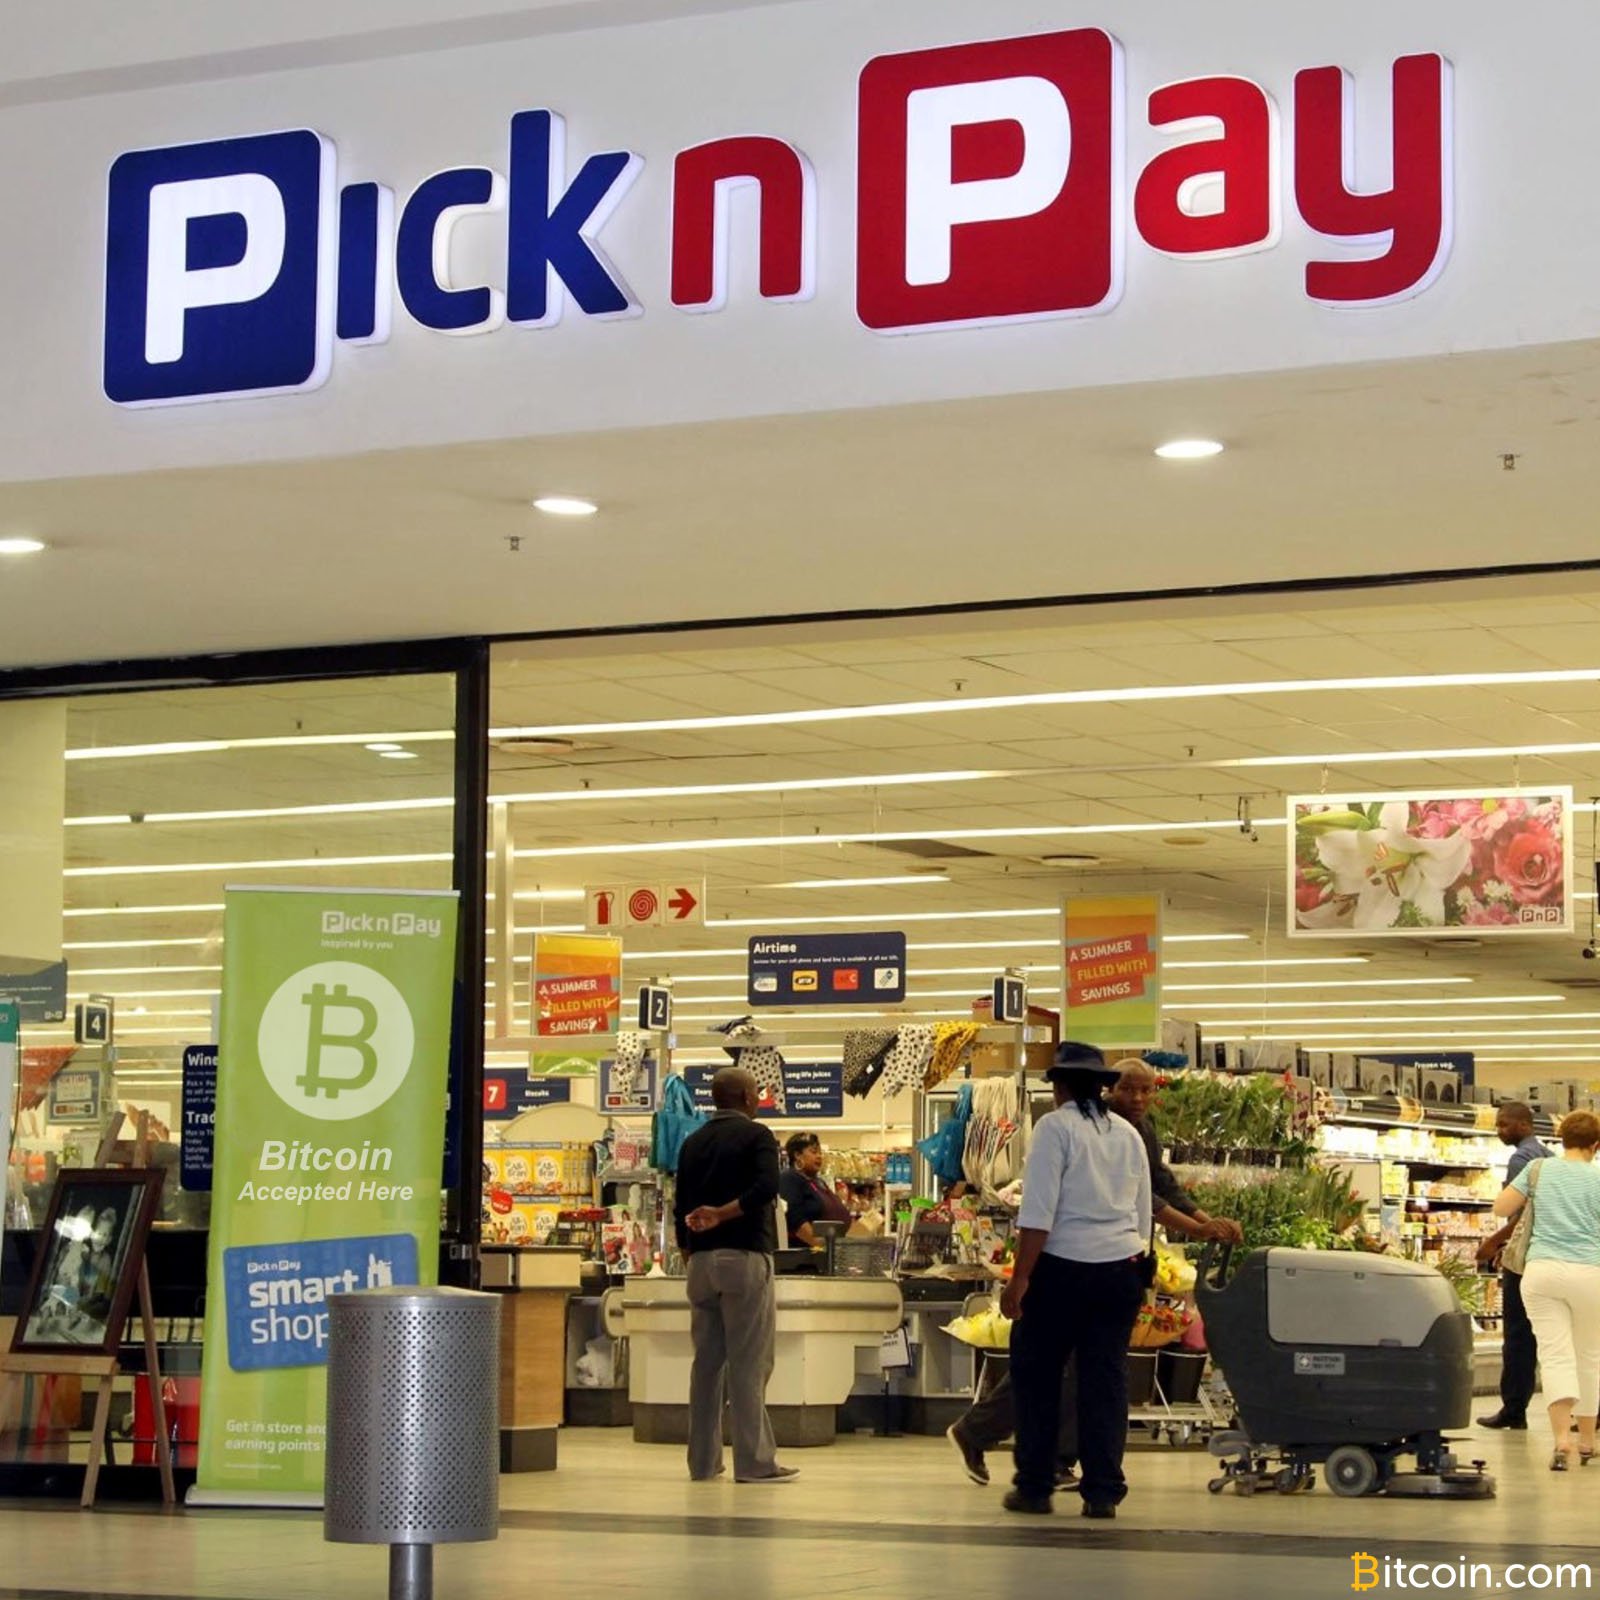 South-Africa’s-Second-Largest-Supermarket-Chain-Pick-n-Pay-Trials-Bitcoin-Payments.jpg